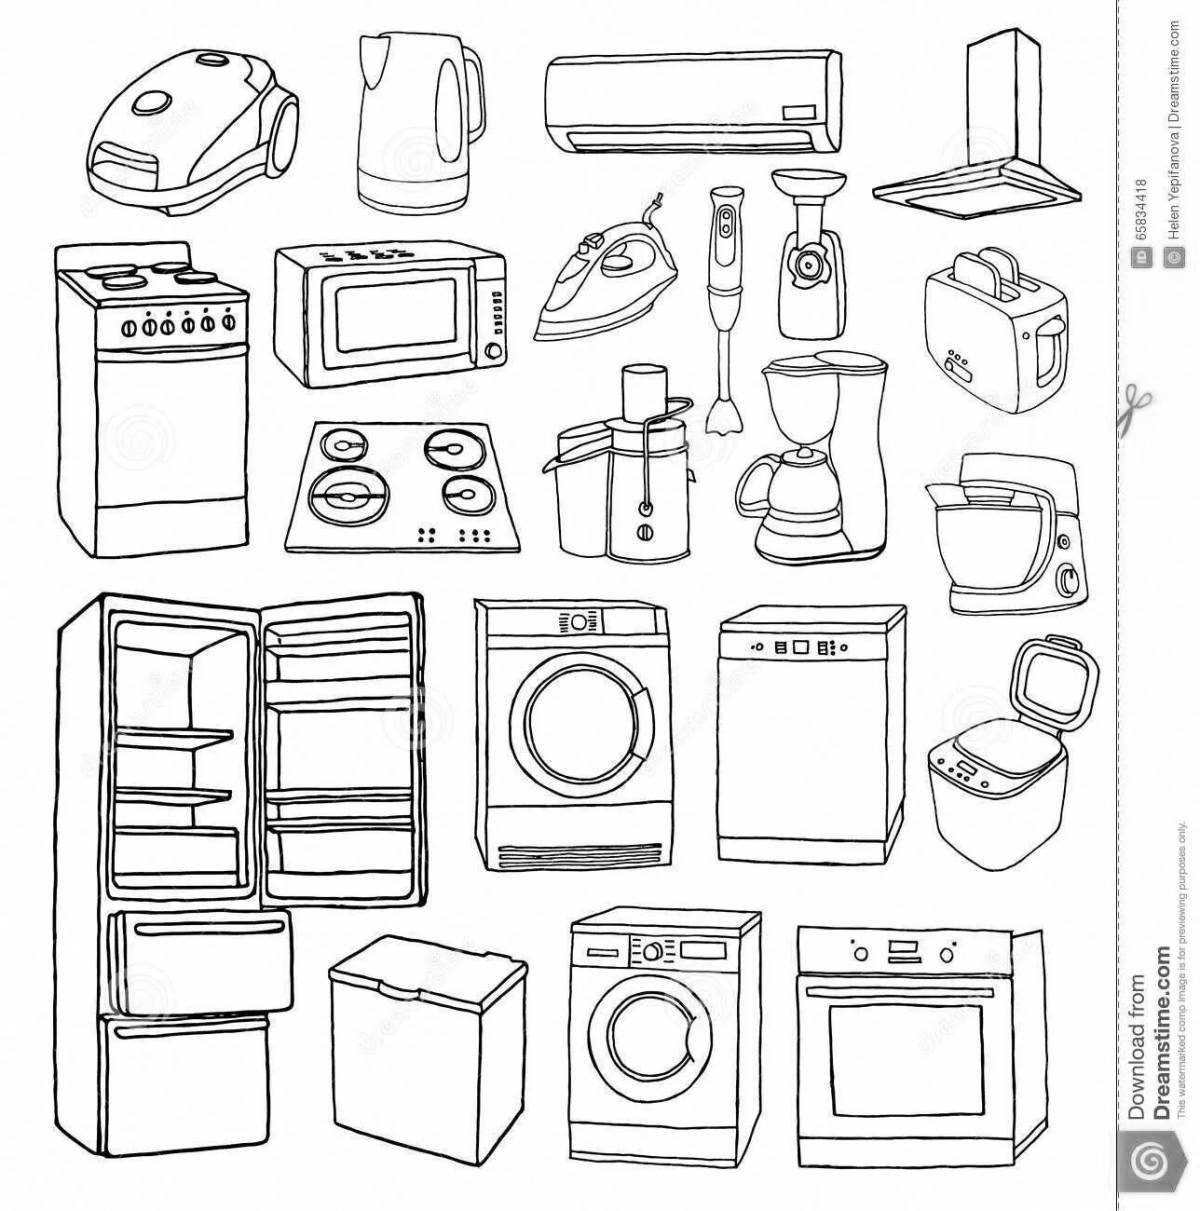 Fun coloring pages of electrical devices